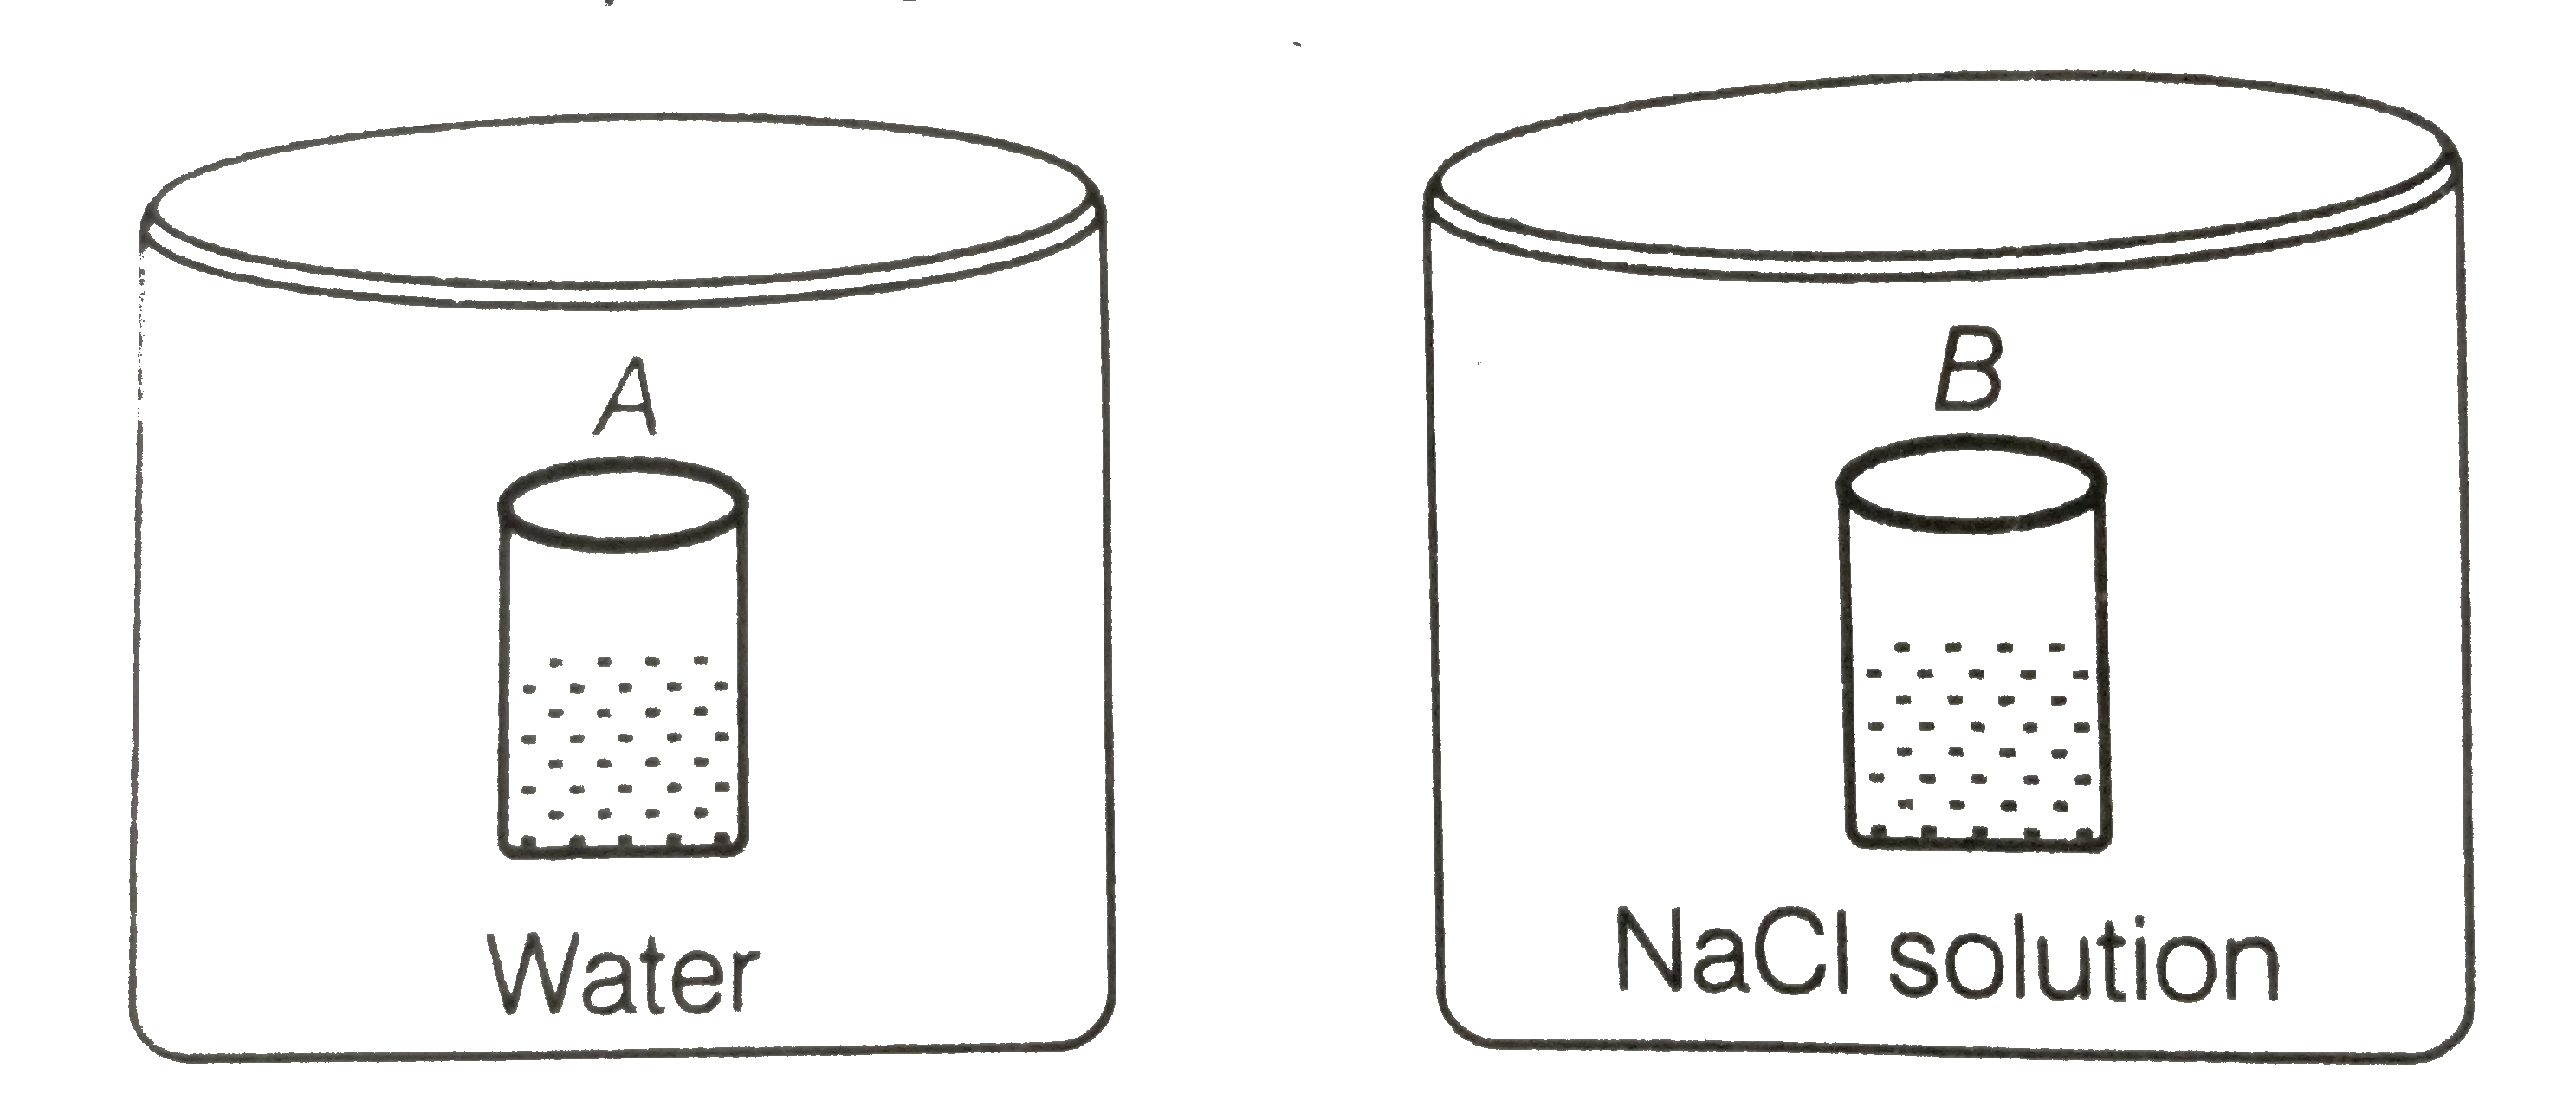 Two beakers of capacity 500 mL were taken. One of these beakers, labelled as